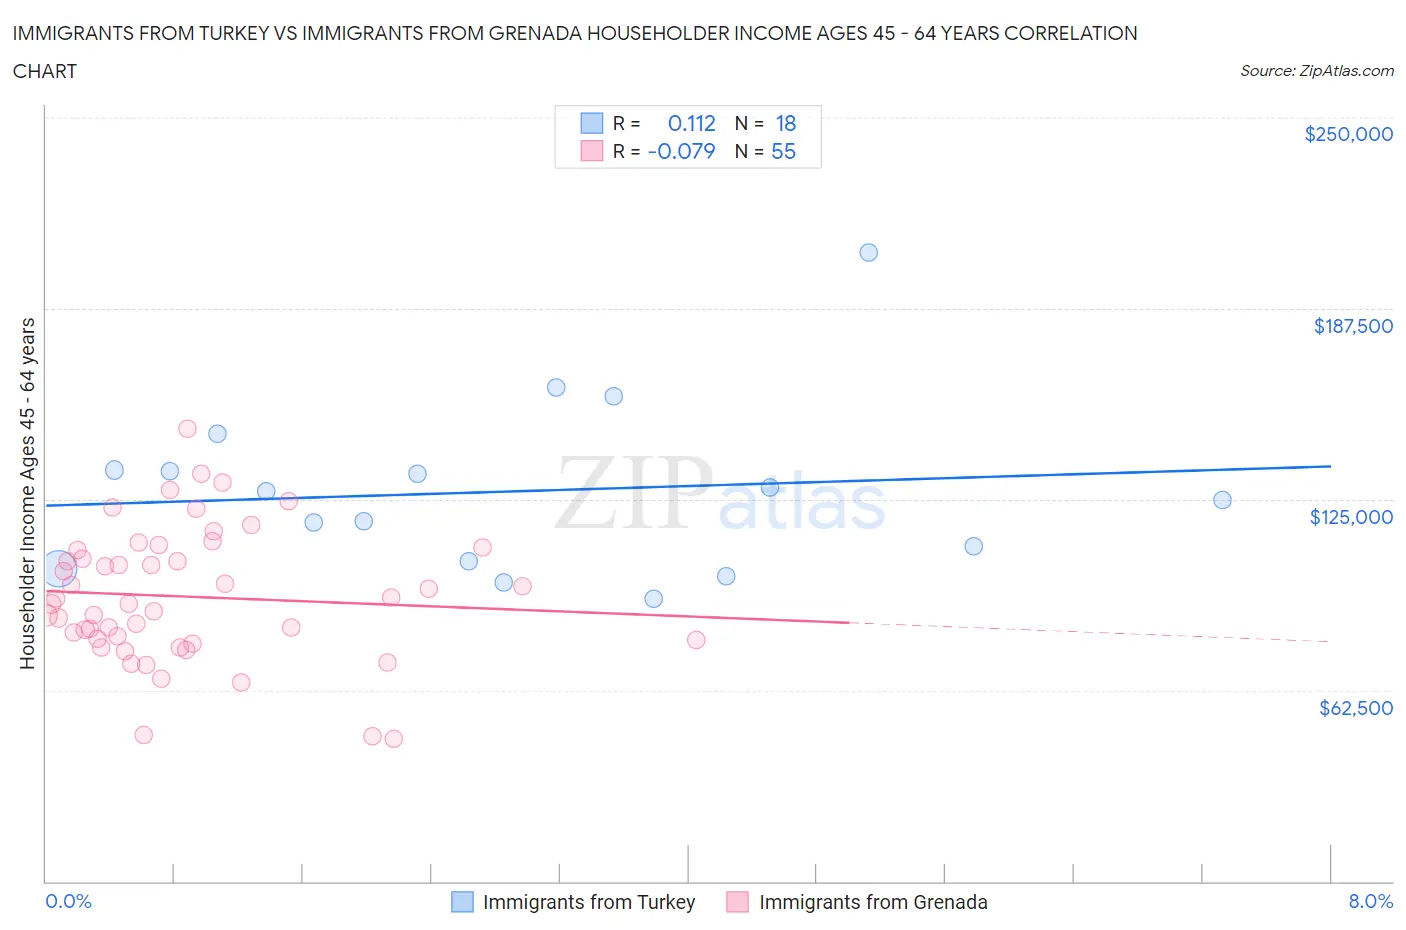 Immigrants from Turkey vs Immigrants from Grenada Householder Income Ages 45 - 64 years